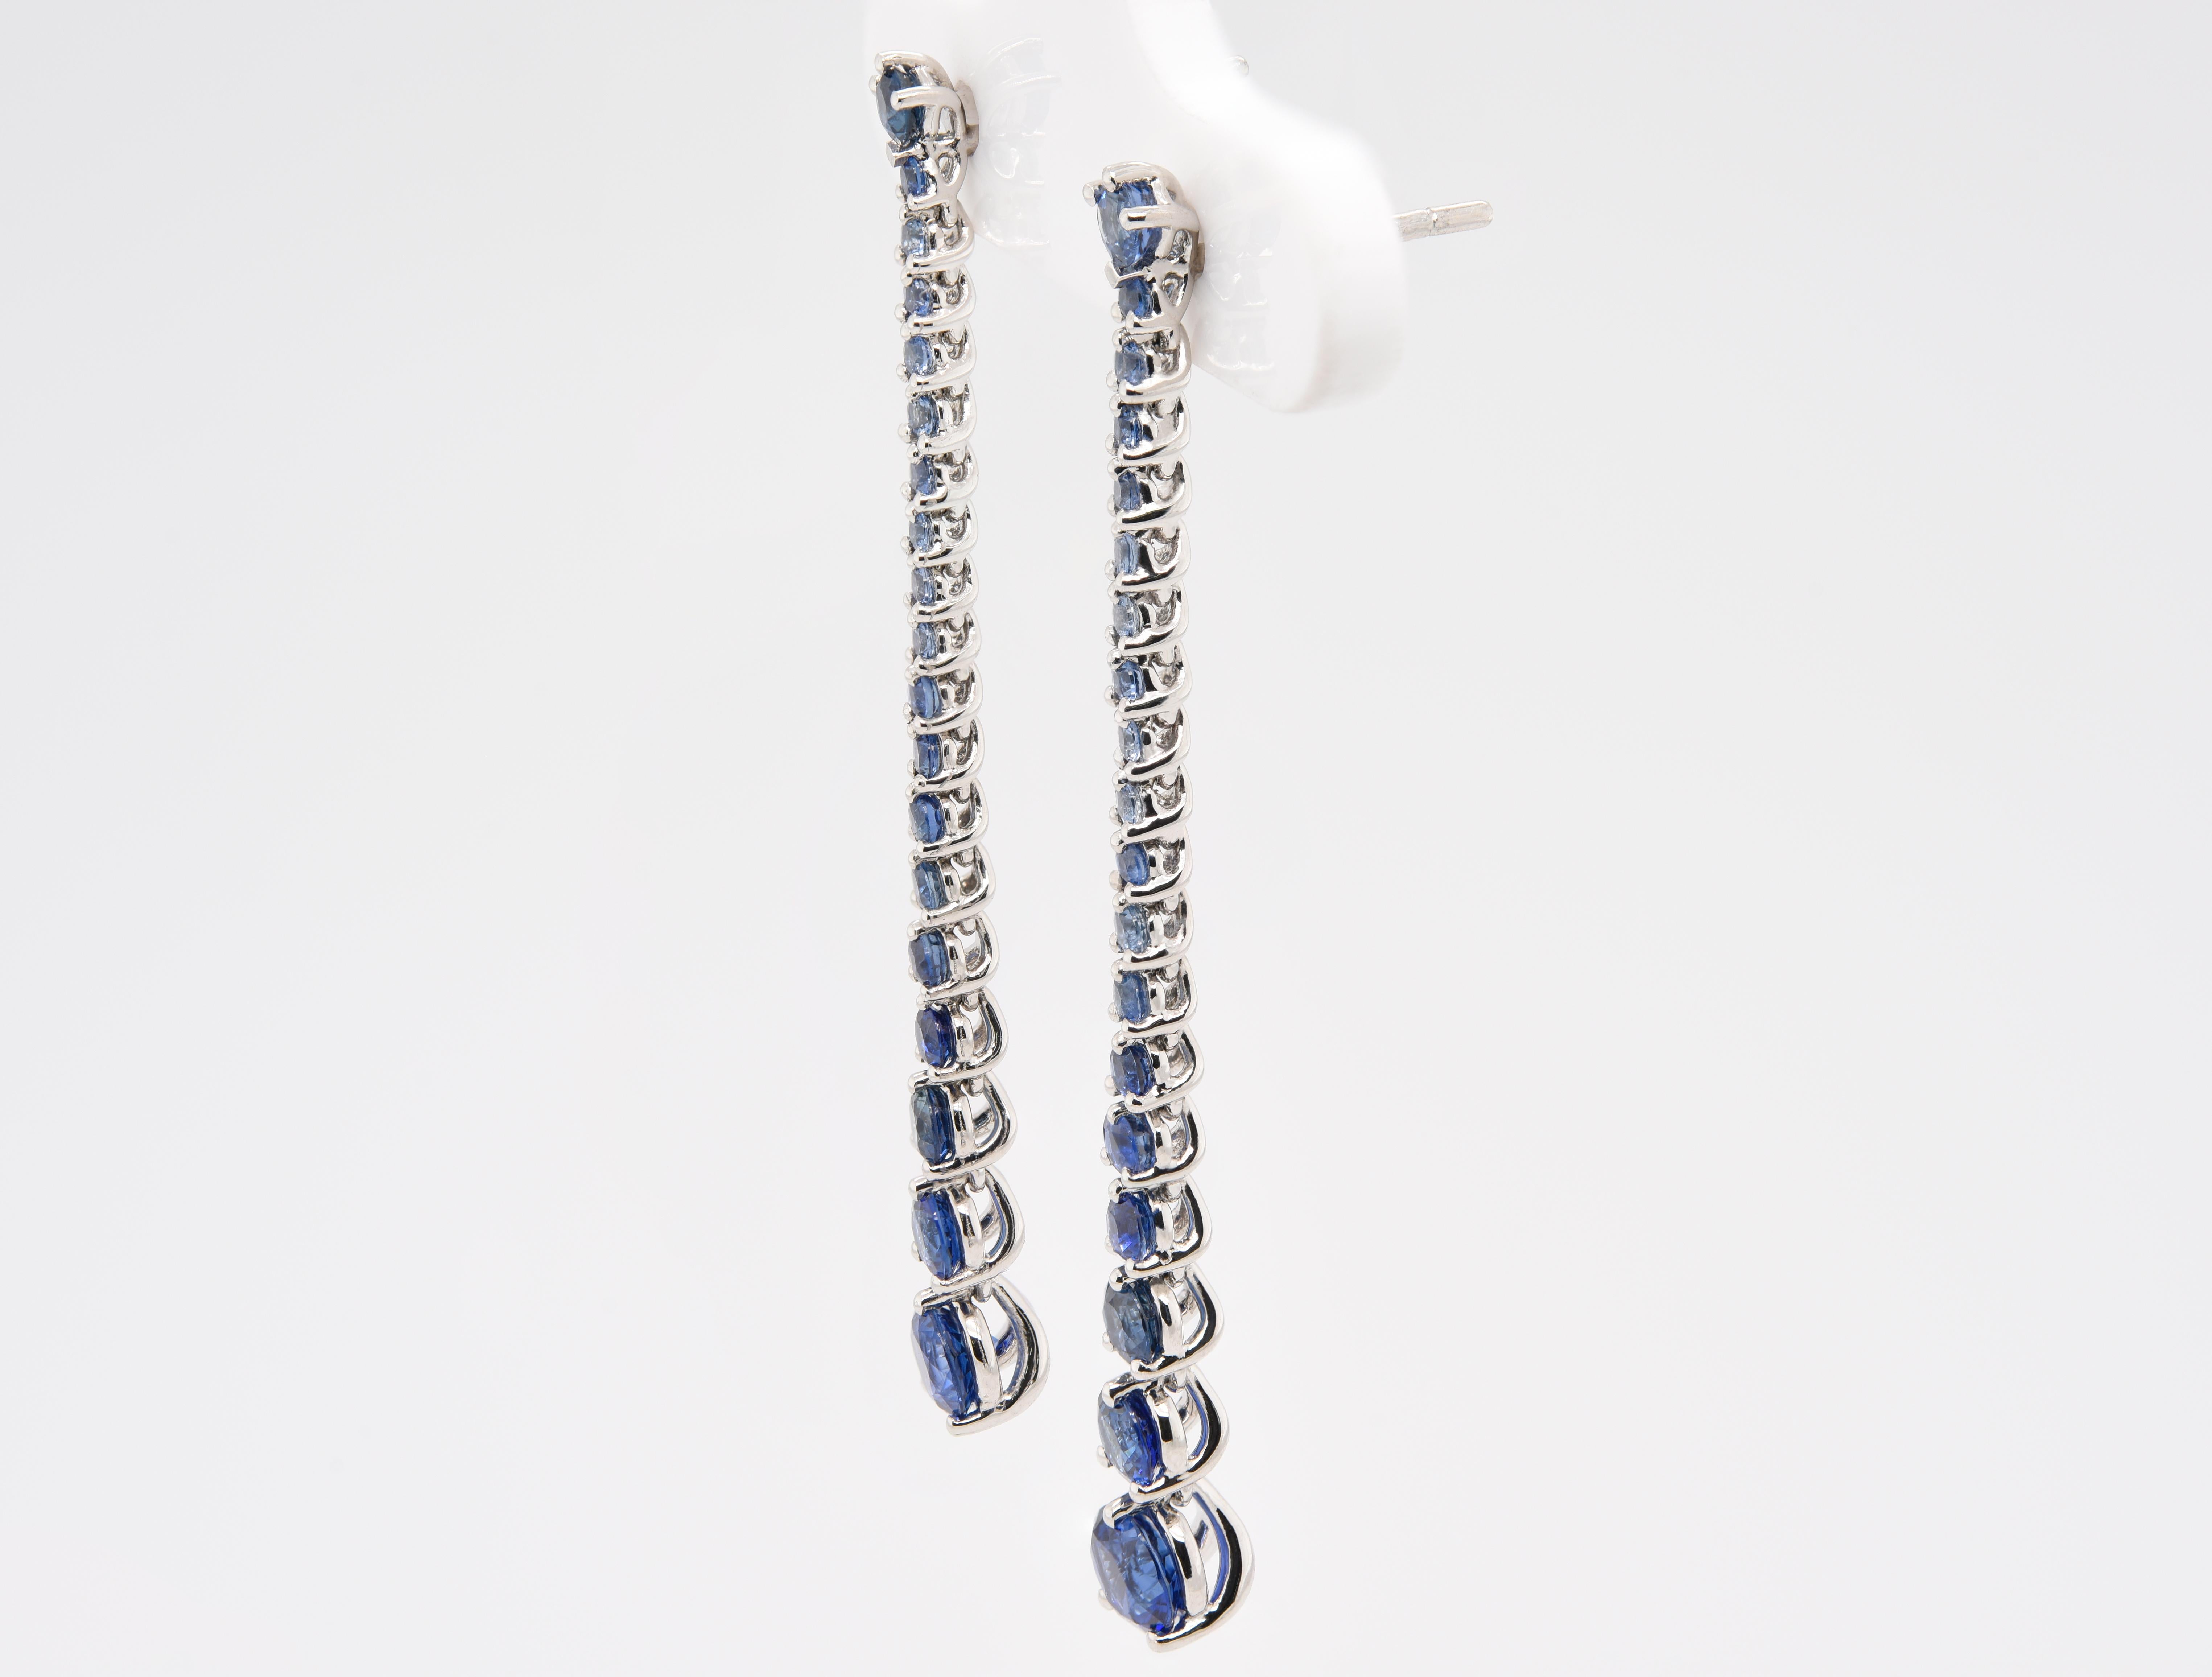 From our Vapour Collection these Blue Sapphire Earrings created in Platinum have over 2.50 carats of graduating gemstones. Exclusive design by JAG New York and can be created in any gemstone your choose. Just ask!

At JAG New York we have been